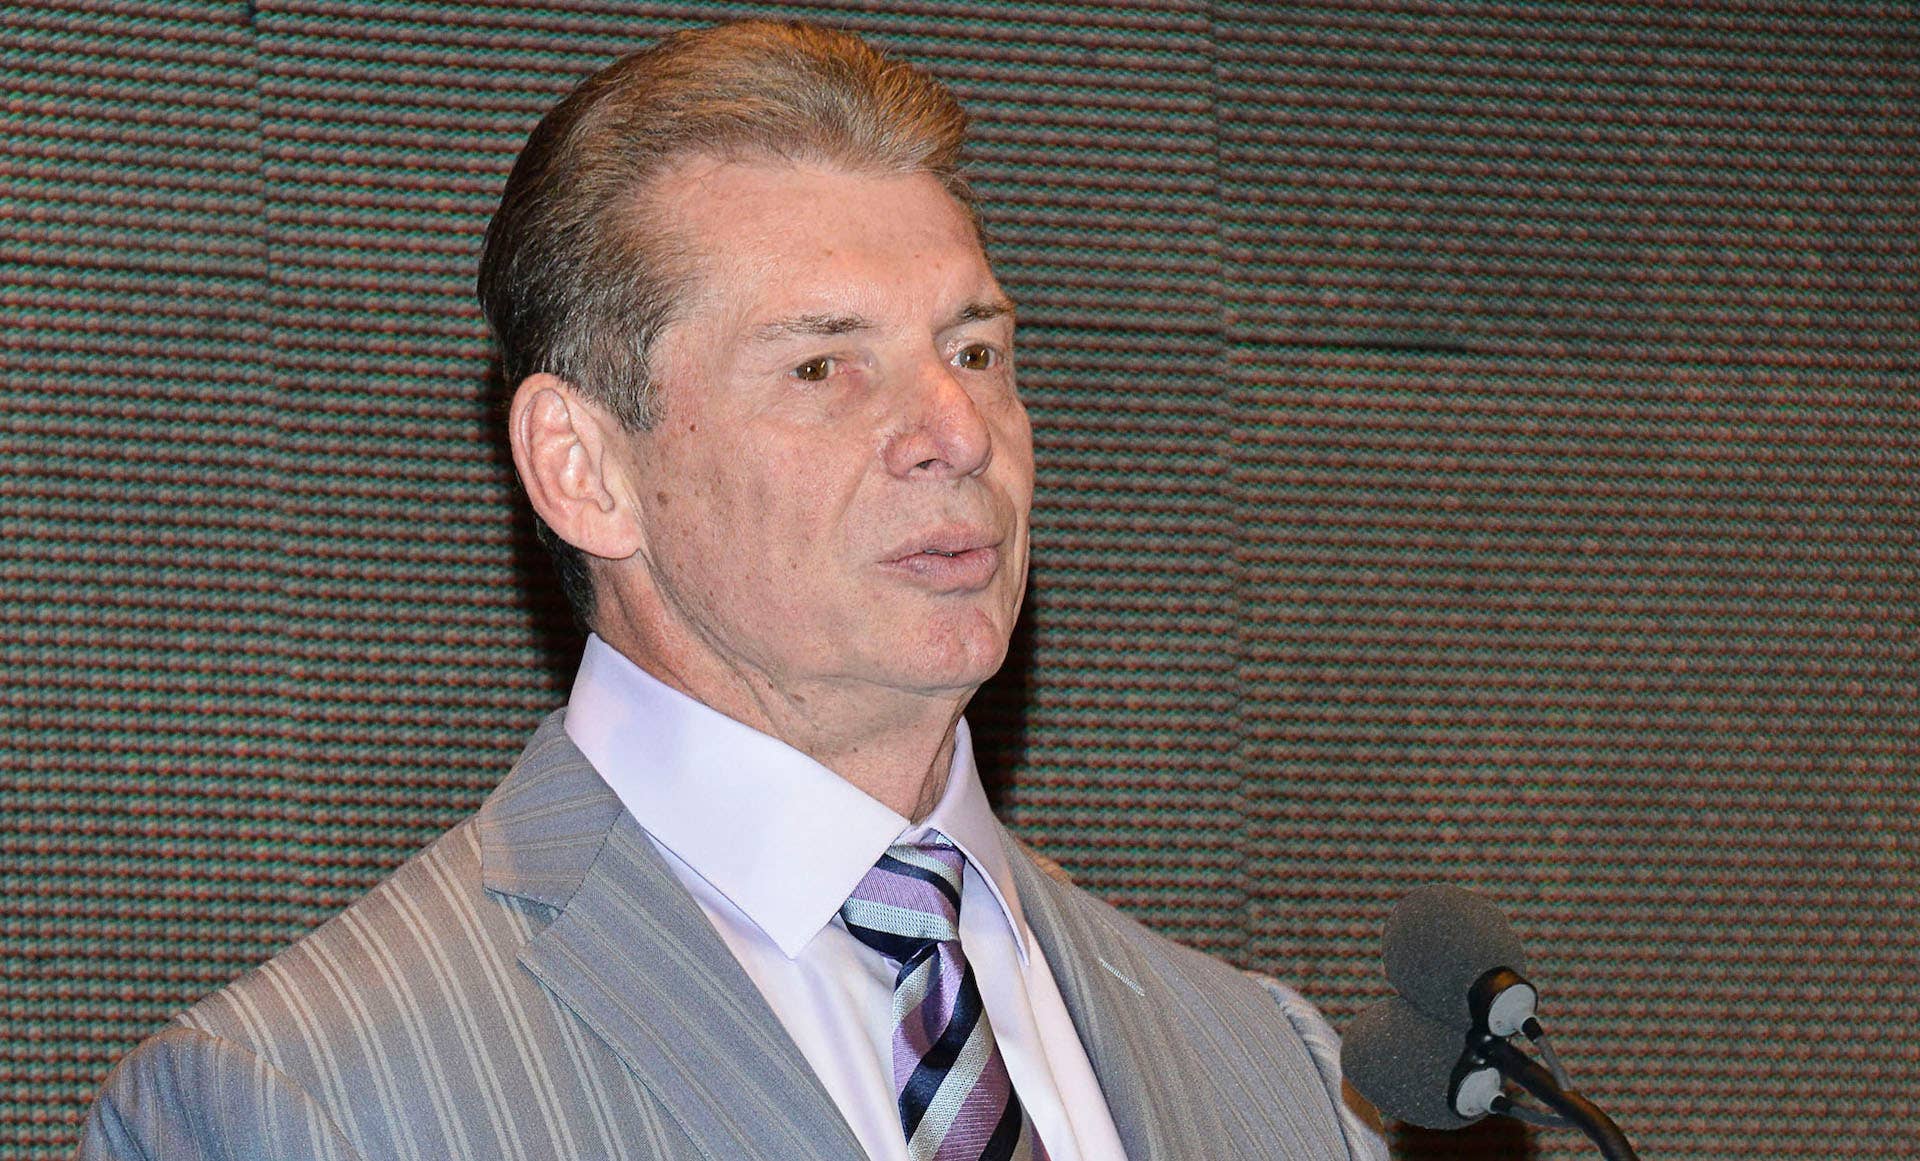 Vince McMahon for news story